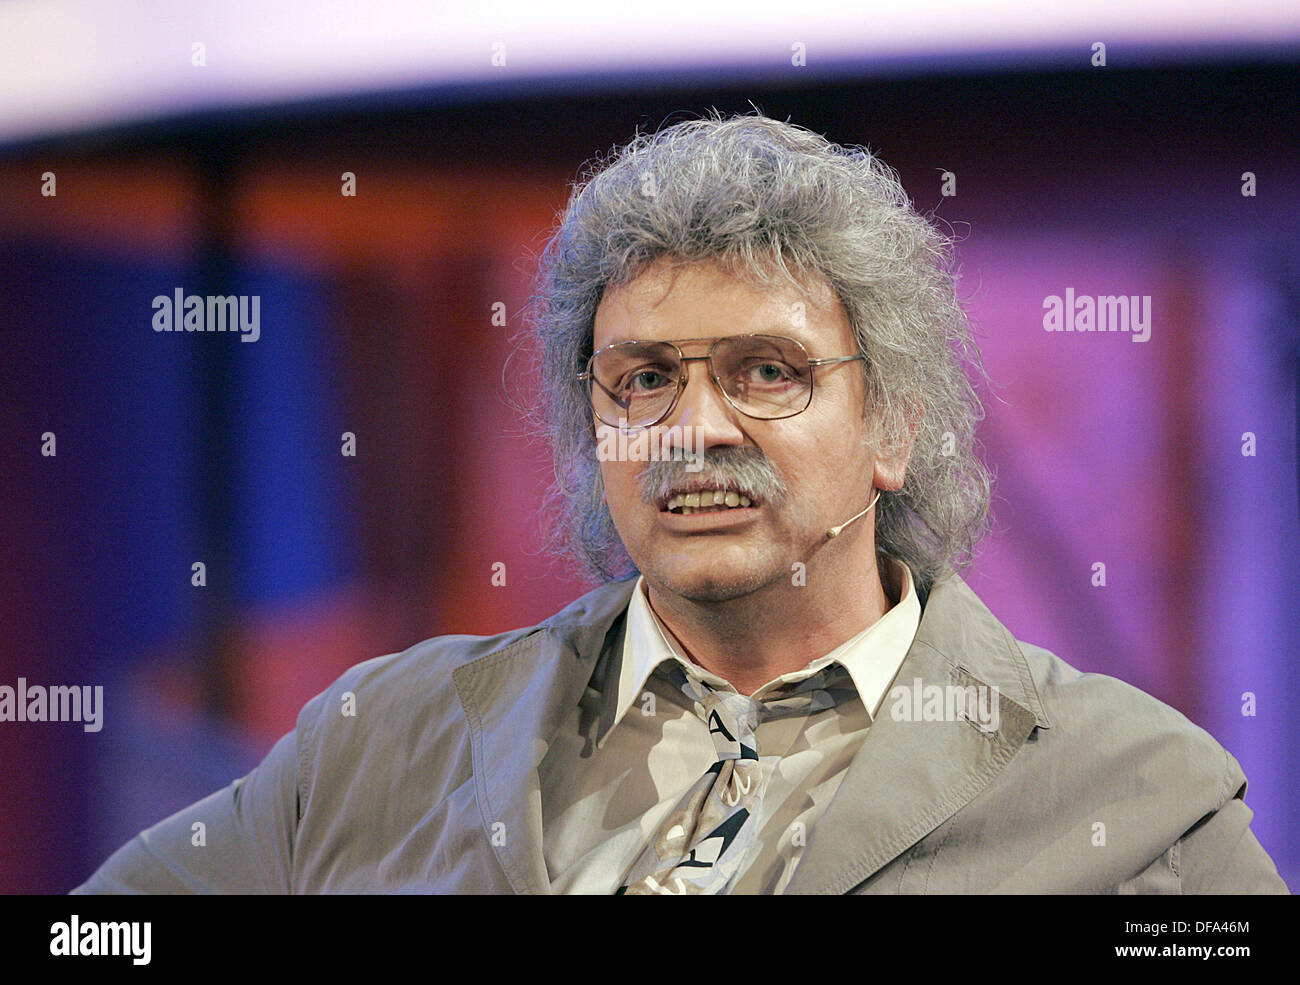 Comedian Hape Kerkeling as 'Horst Schlemmer' on the 10th of October in 2006 during the awarding ceremony of the German Comedy Award in Cologne. Stock Photo